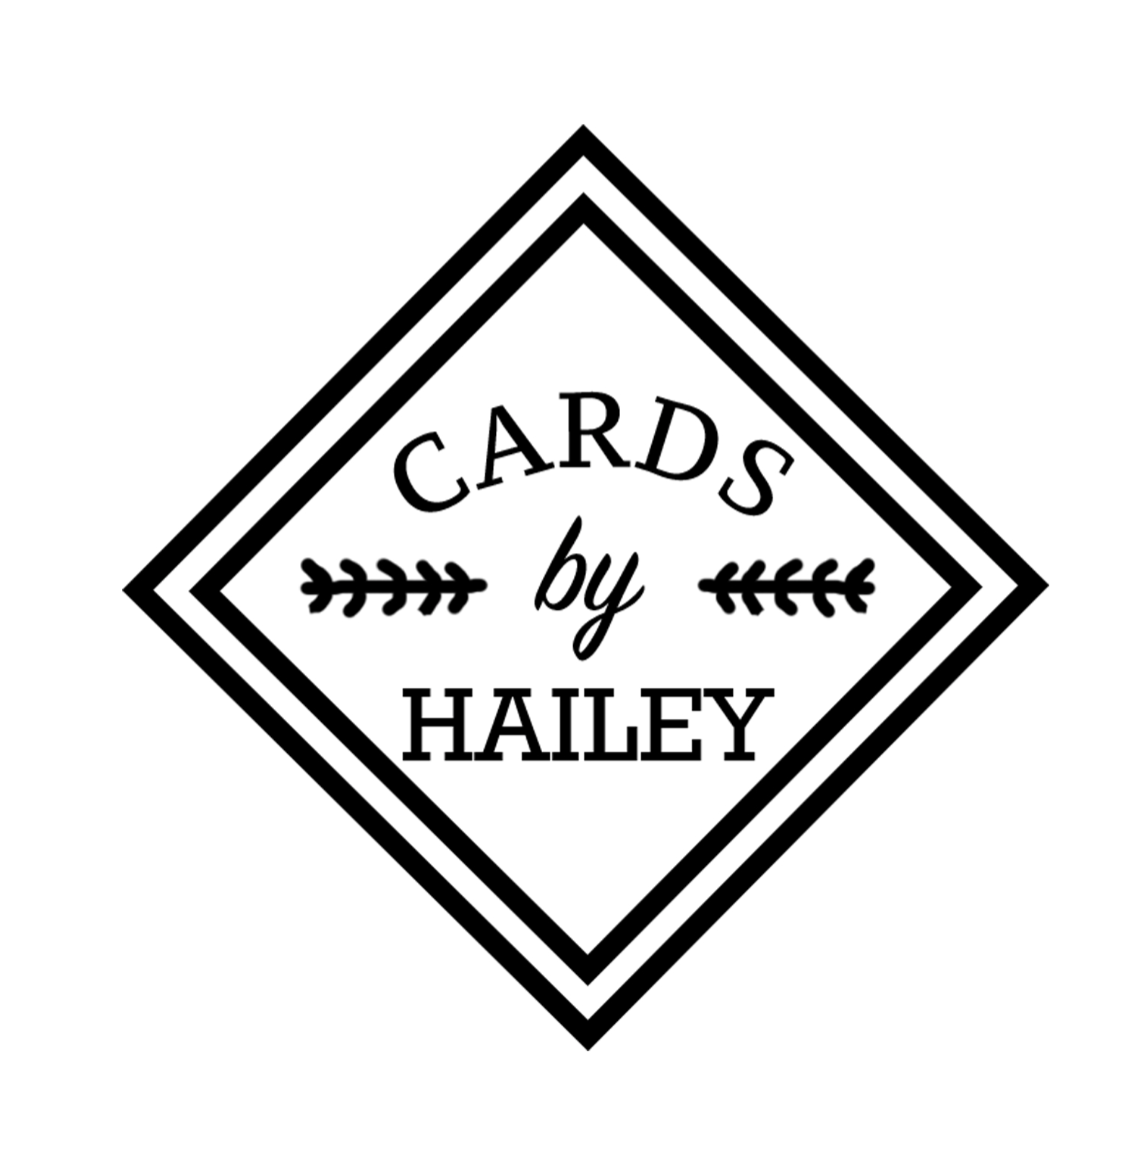 CARDS BY HAILEY